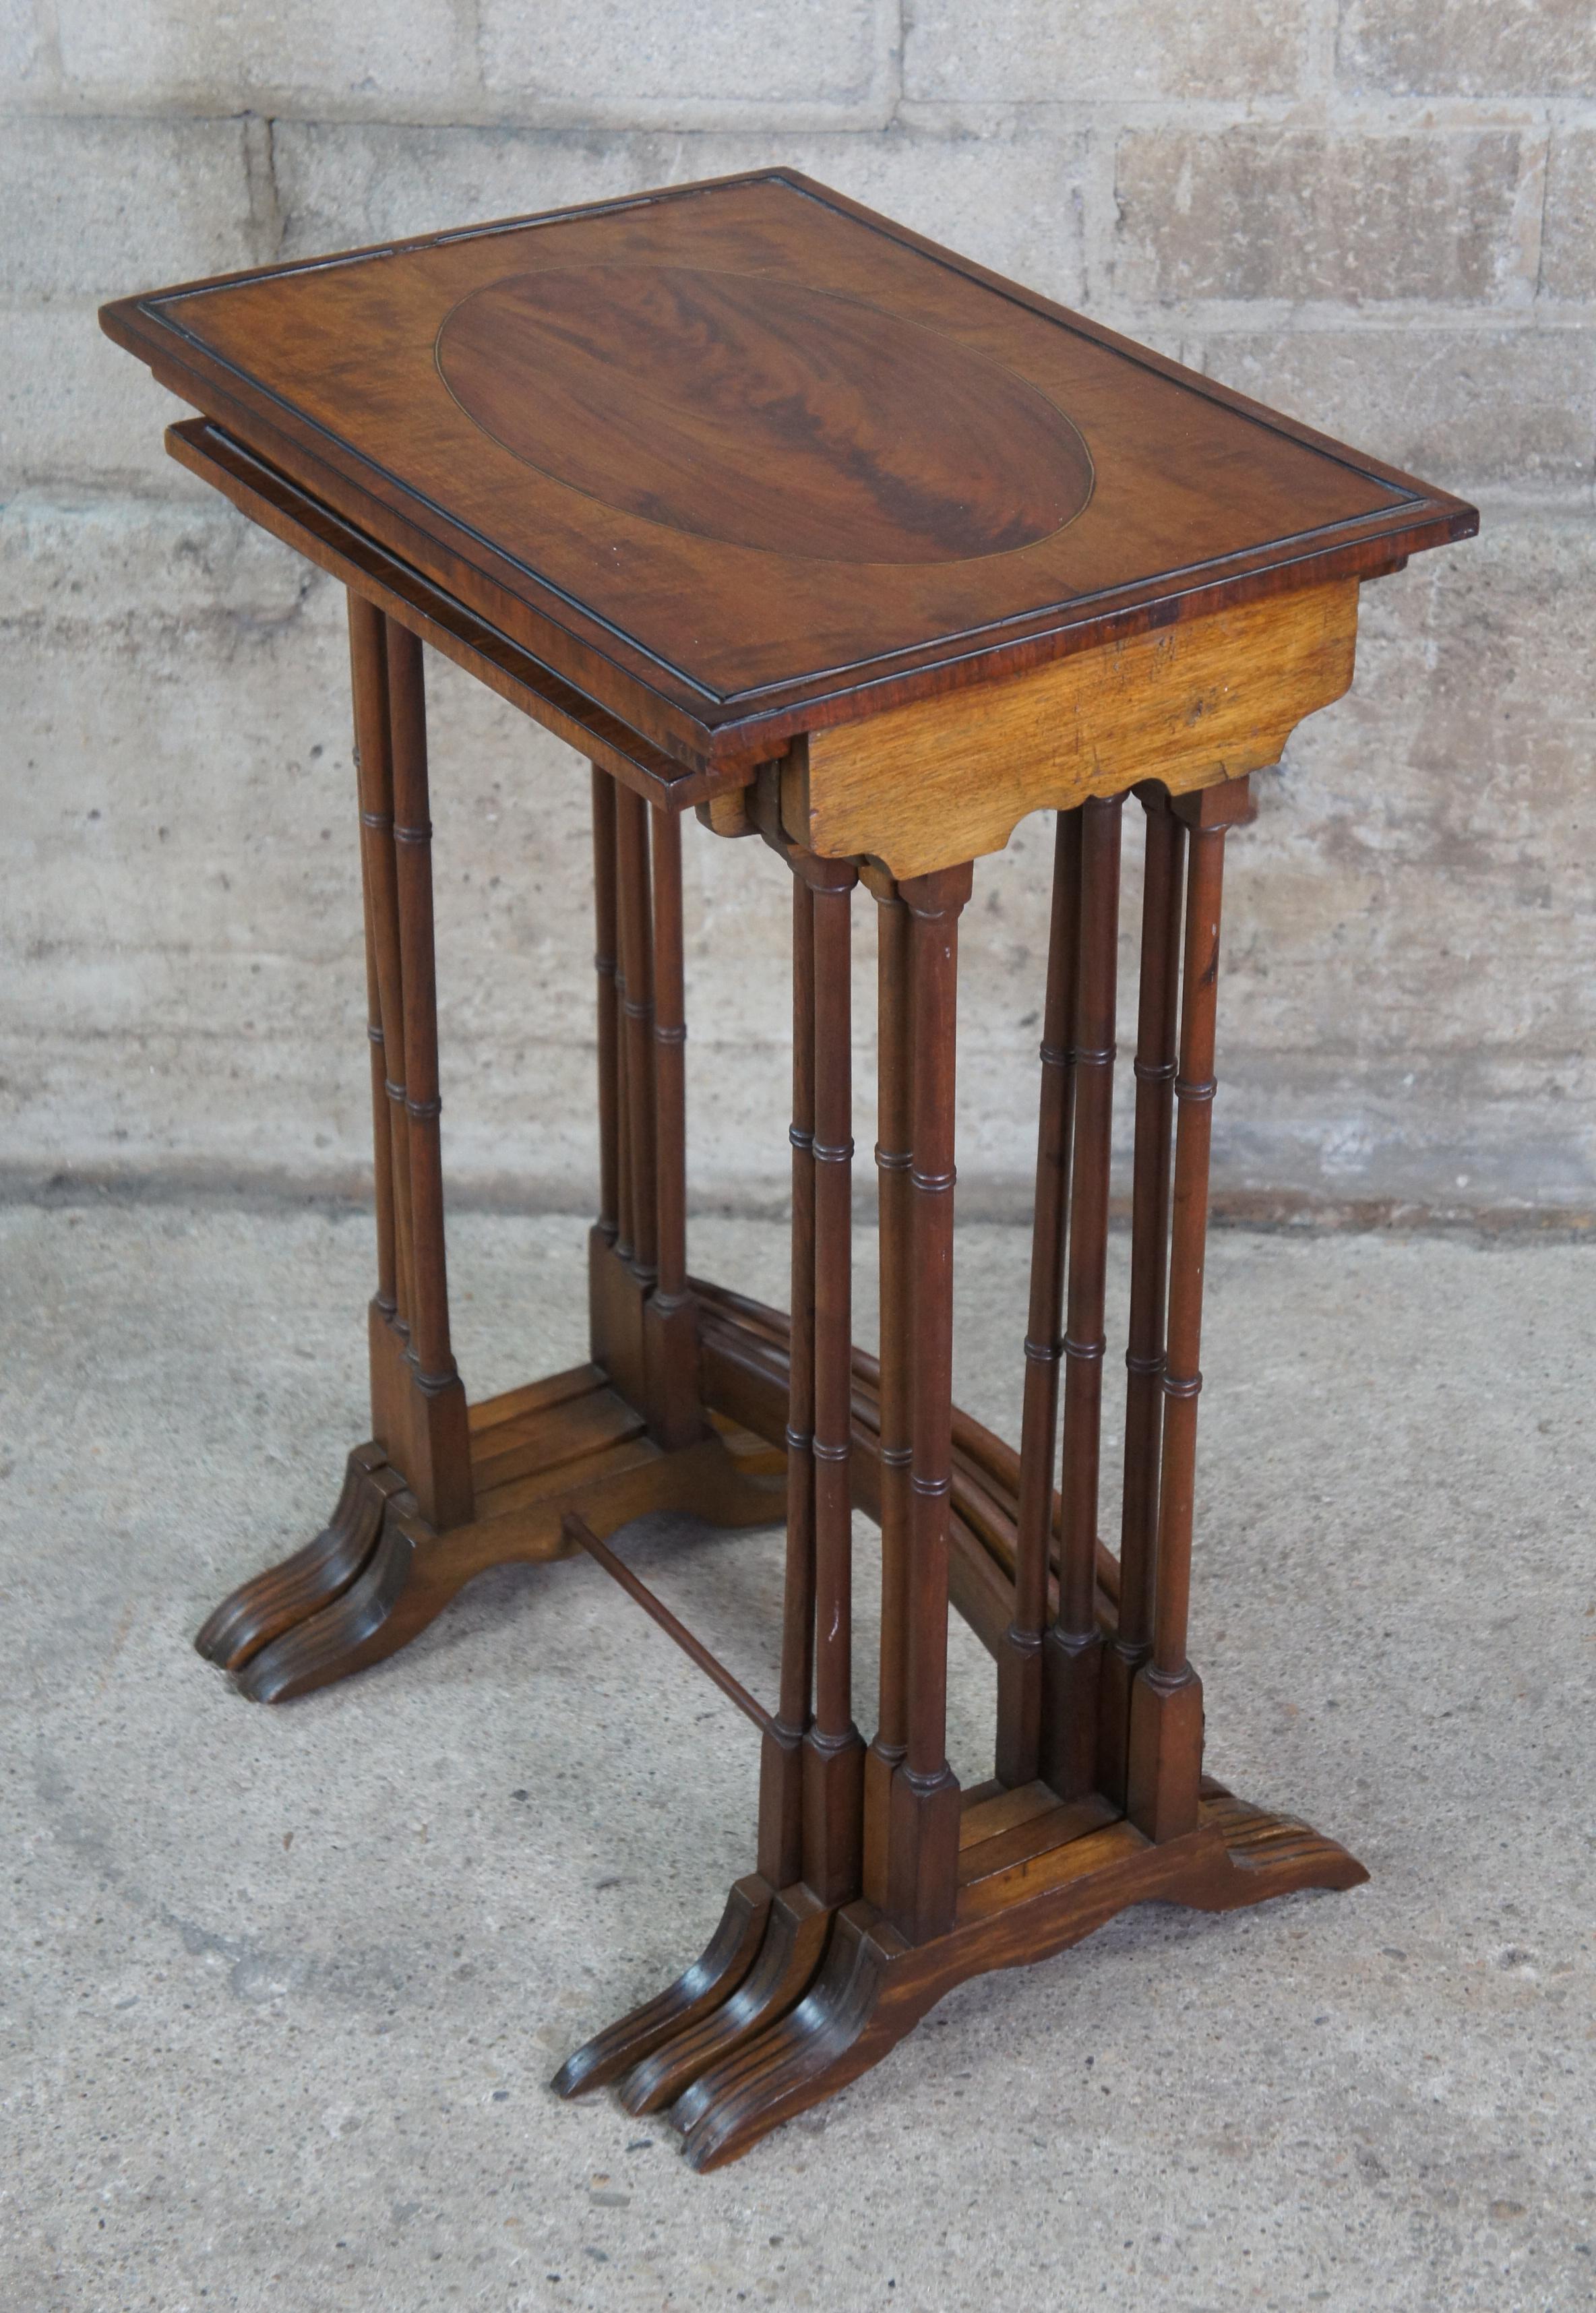 19th Century 4 Antique Regency Flame Mahogany Inlaid Nesting Side Accent Tables Sheraton